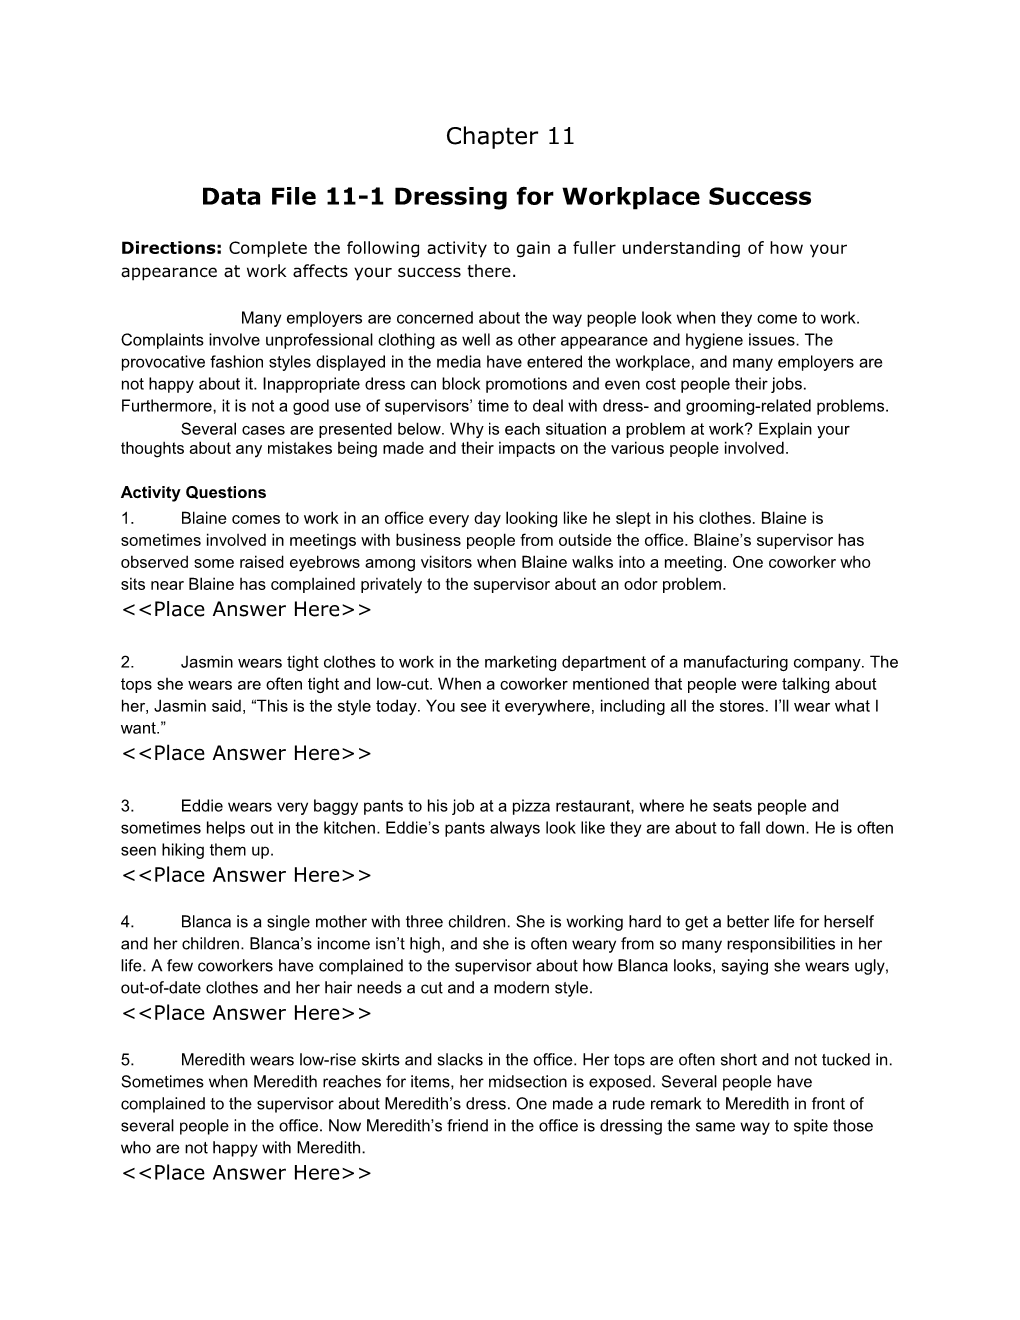 Data File 11-1 Dressing for Workplace Success